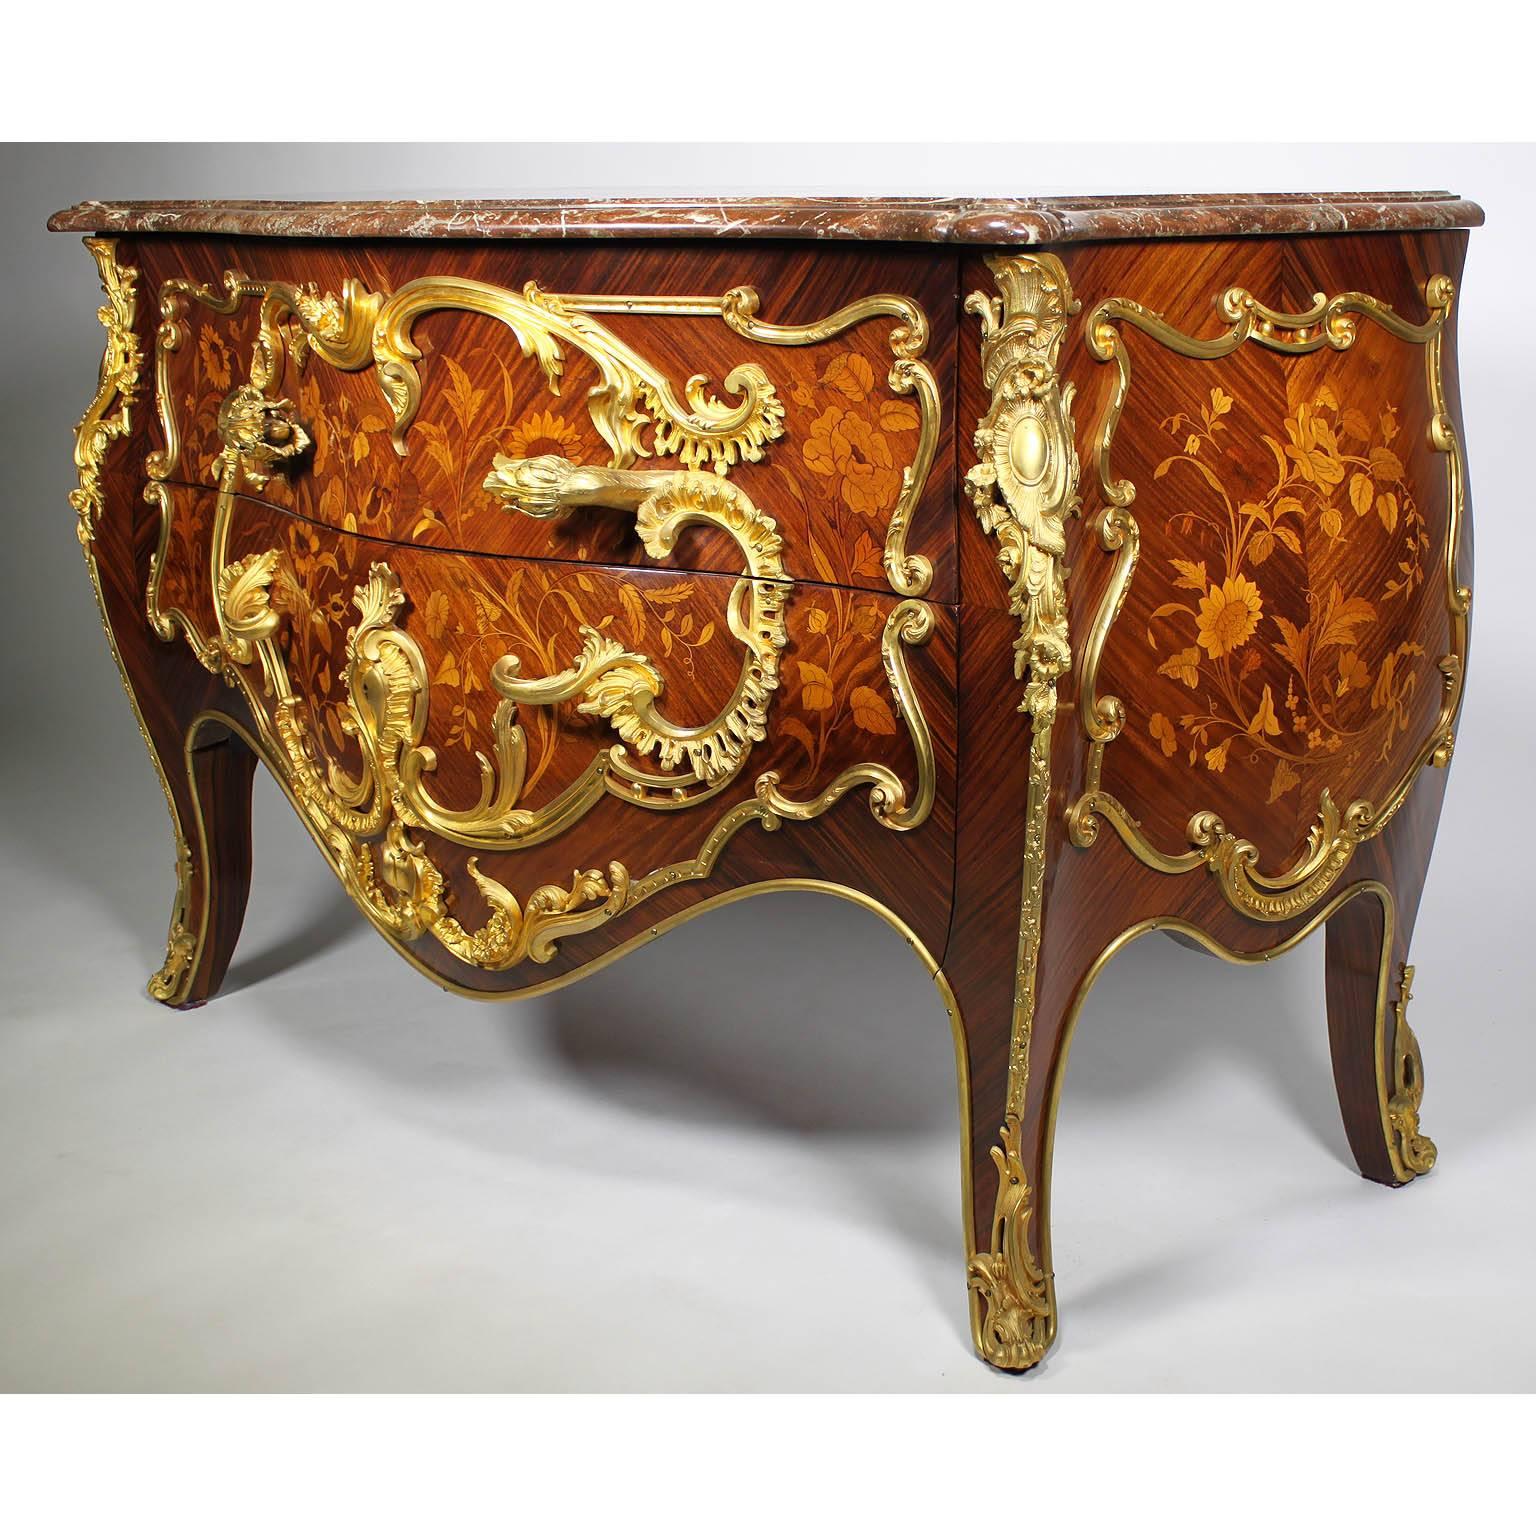 French, 19th Century, Louis XV Style Gilt Bronze-Mounted and Marquetry Commode For Sale 2